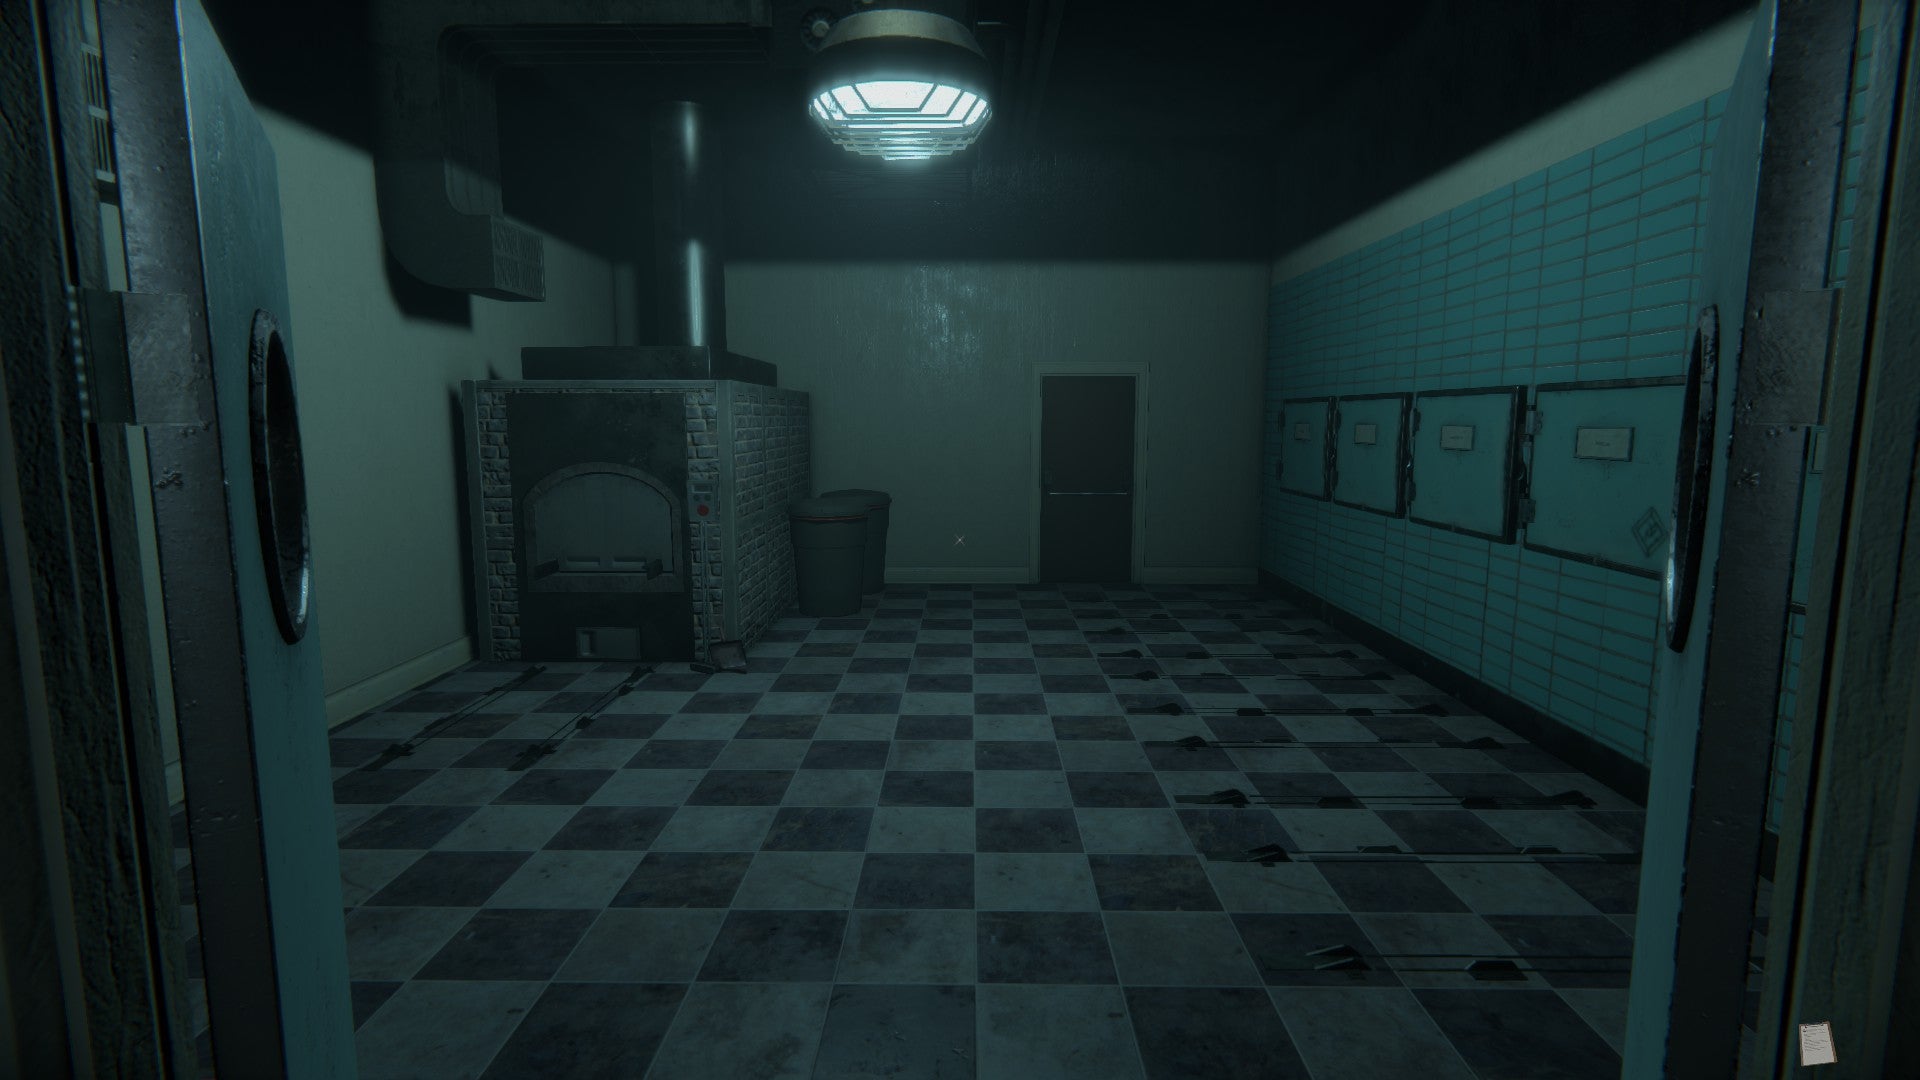 A darkened morgue room, with a cremation oven on the left, a chequered black and white floor, pale and weak white light, and cold storage vaults on the right.